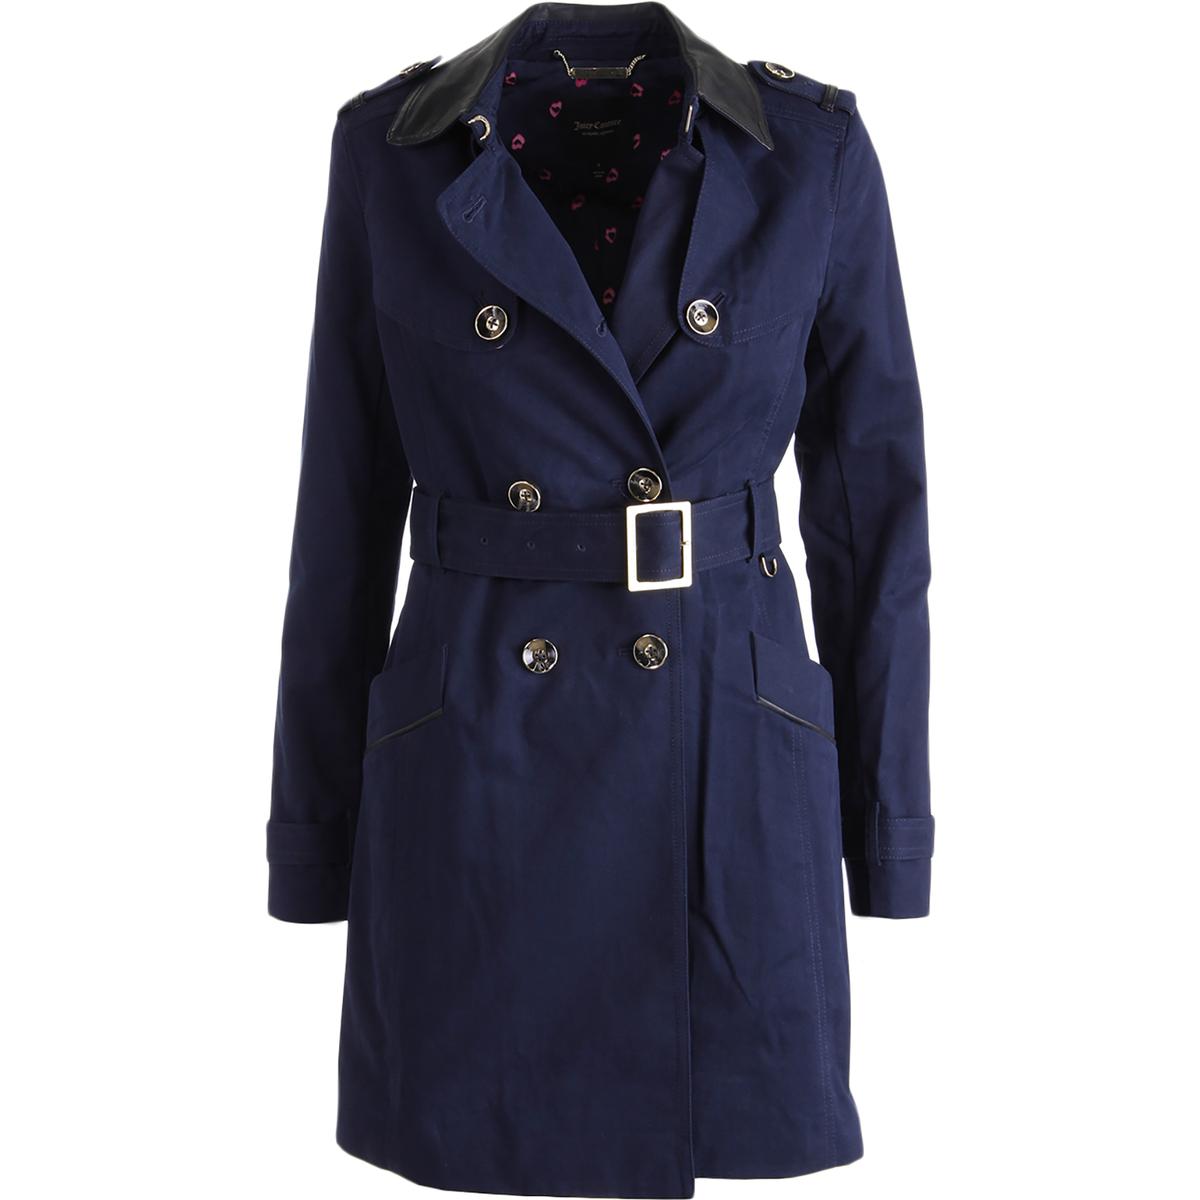 Juicy Couture Black Label 0769 Womens Twill Trench Coat BHFO | eBay